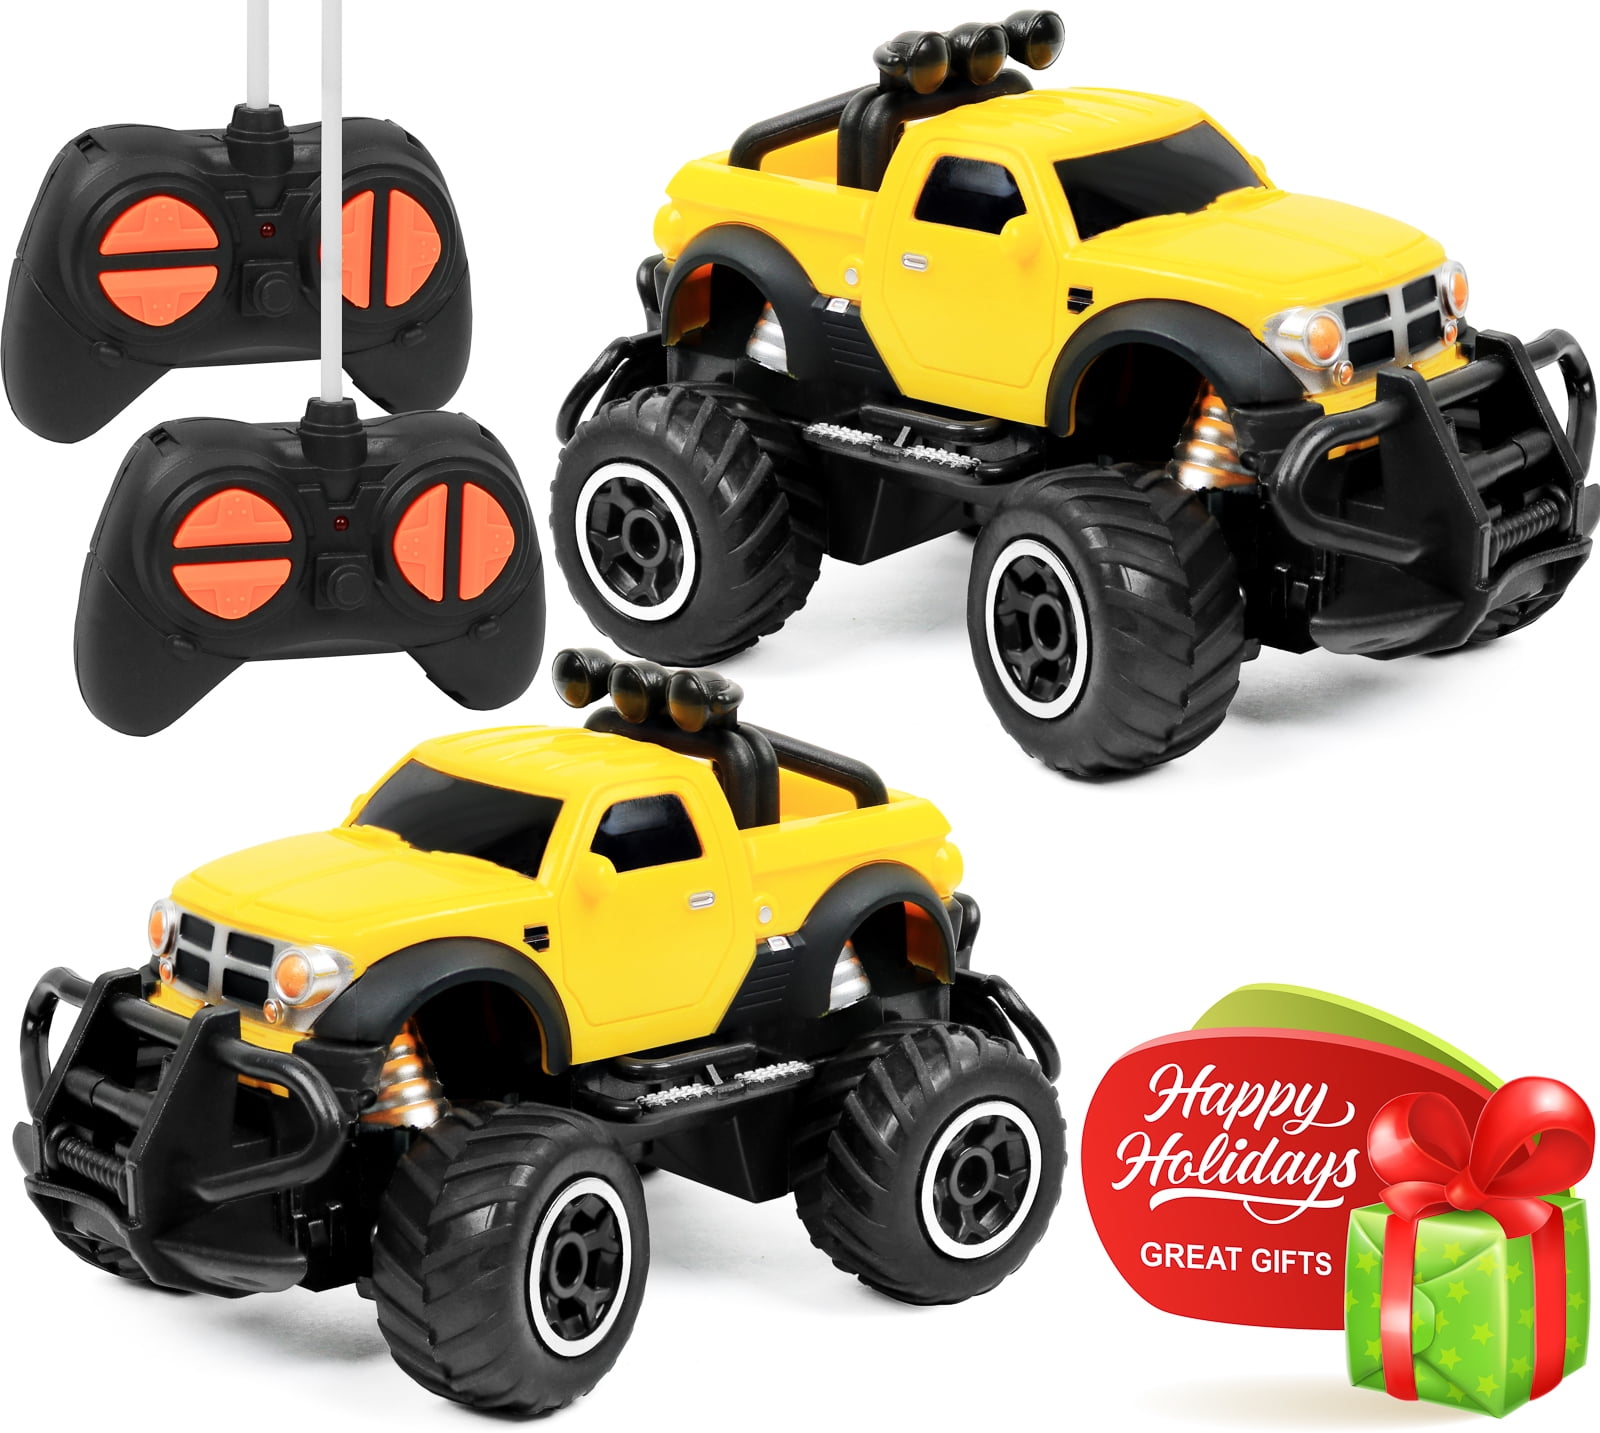 2 Sets Hautton Remote Control Race Car for Toddlers Kids Children Boys Girls 3 4 5 6 7 Years Old Radio Control RC Toy Car with Music and Lights